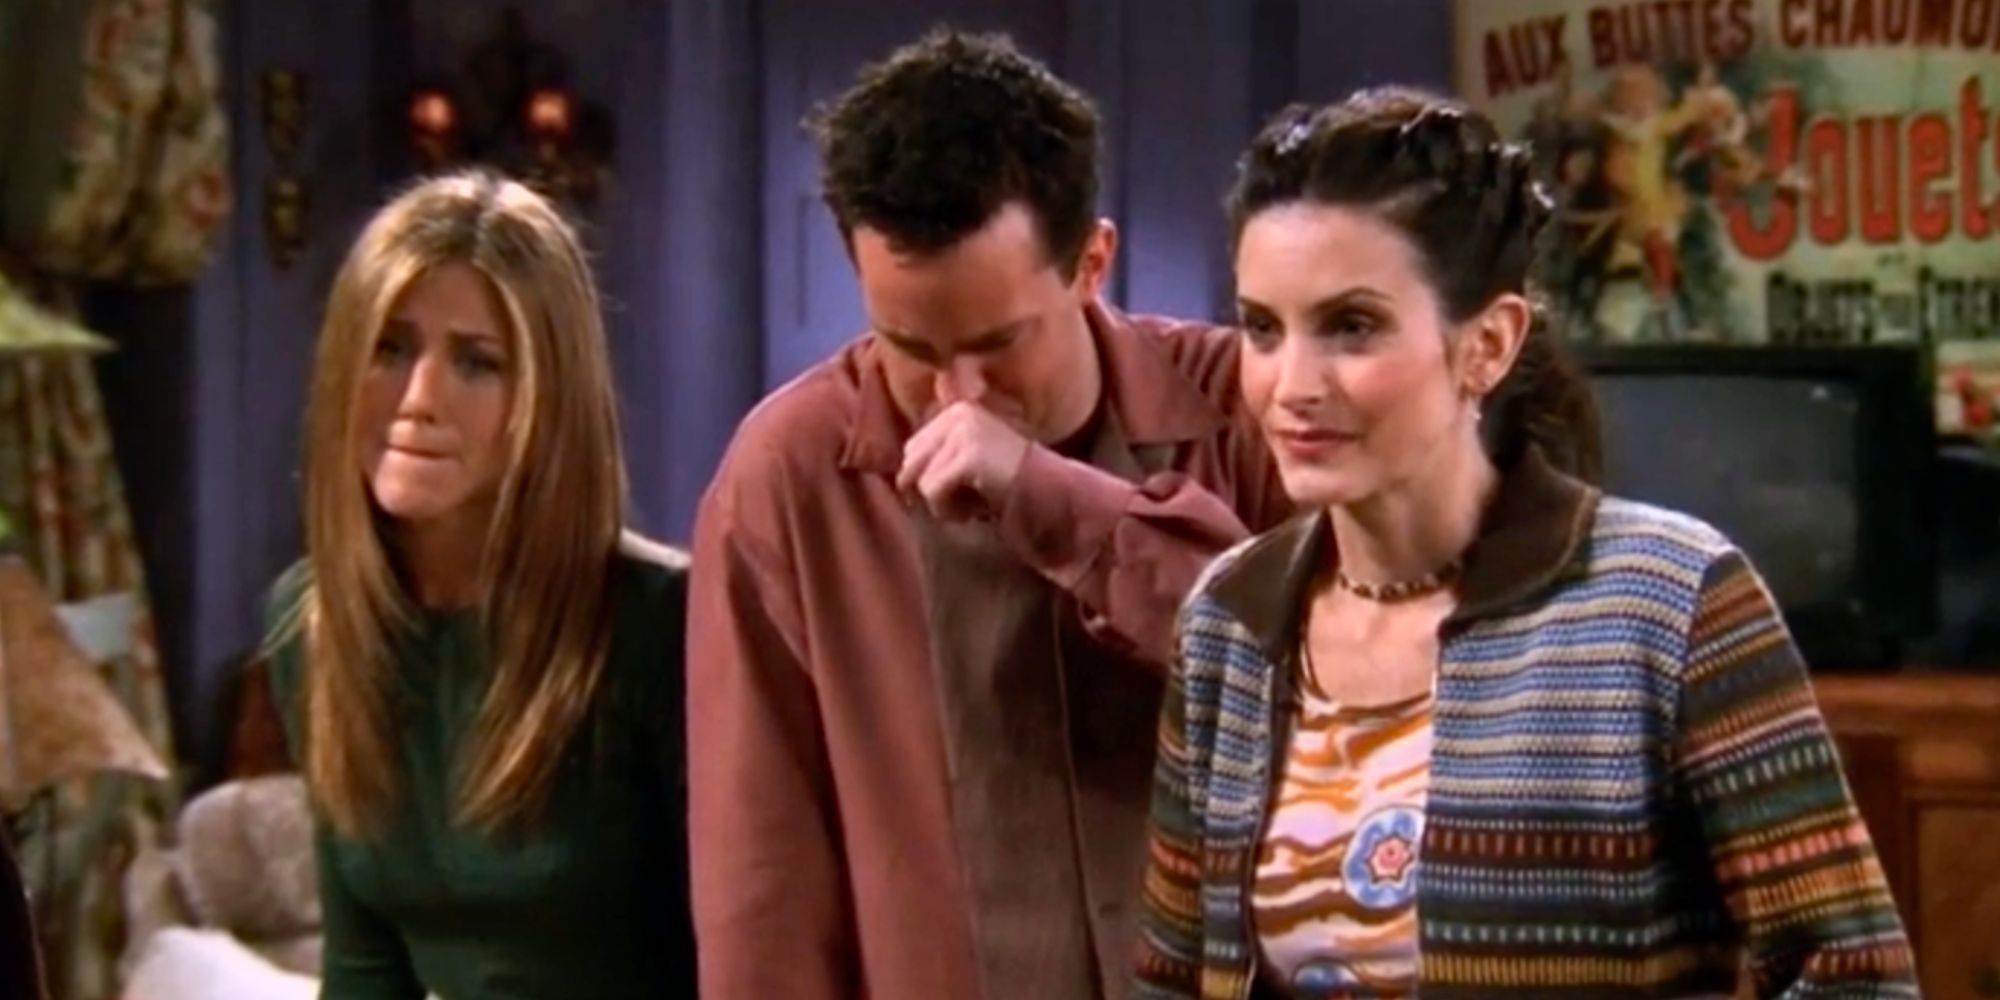 Rachel Green standing next to Chandler Bing trying not to laugh with Monica Geller standing on his other side in Friends